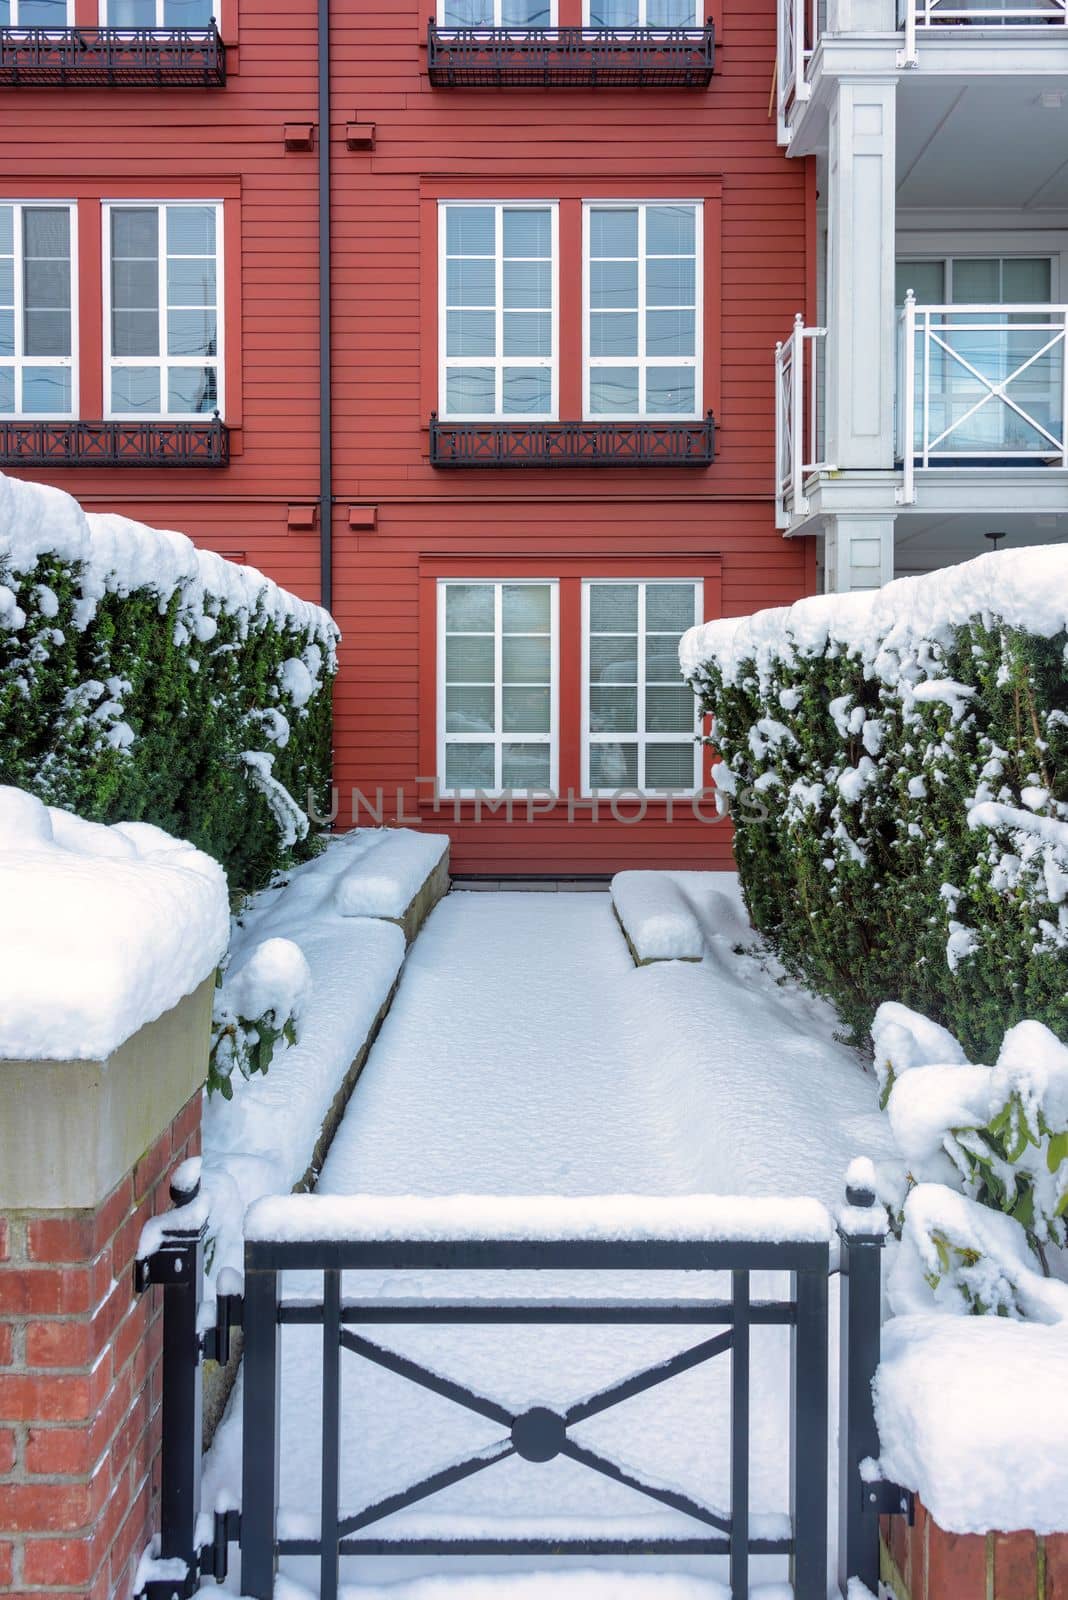 Pathway to residential building covered with snow by Imagenet